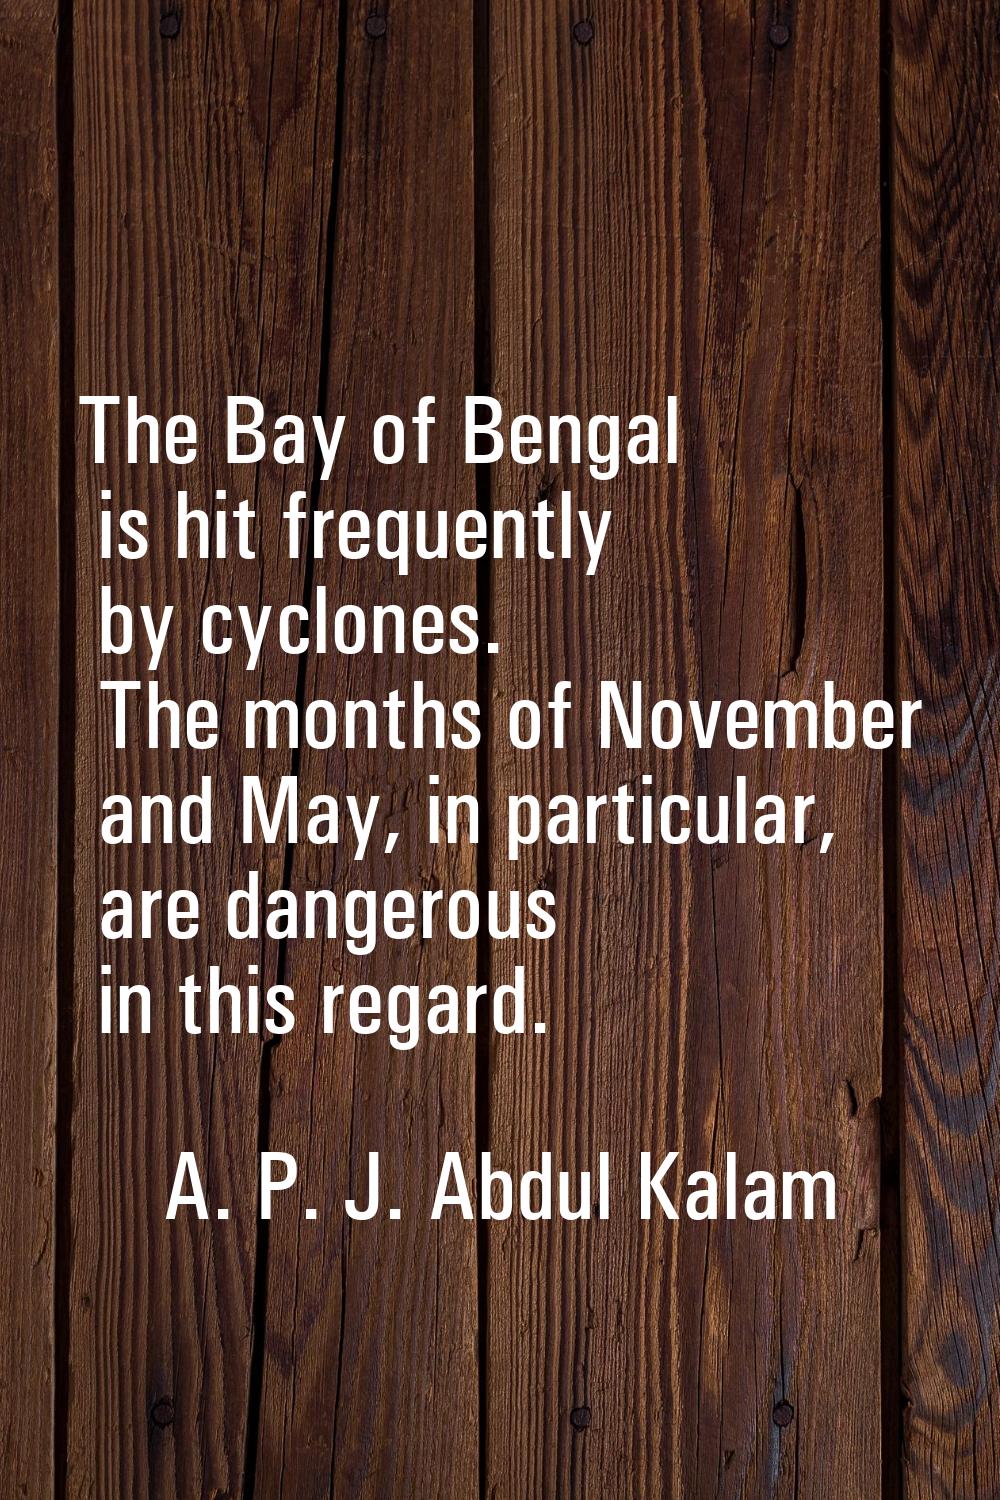 The Bay of Bengal is hit frequently by cyclones. The months of November and May, in particular, are